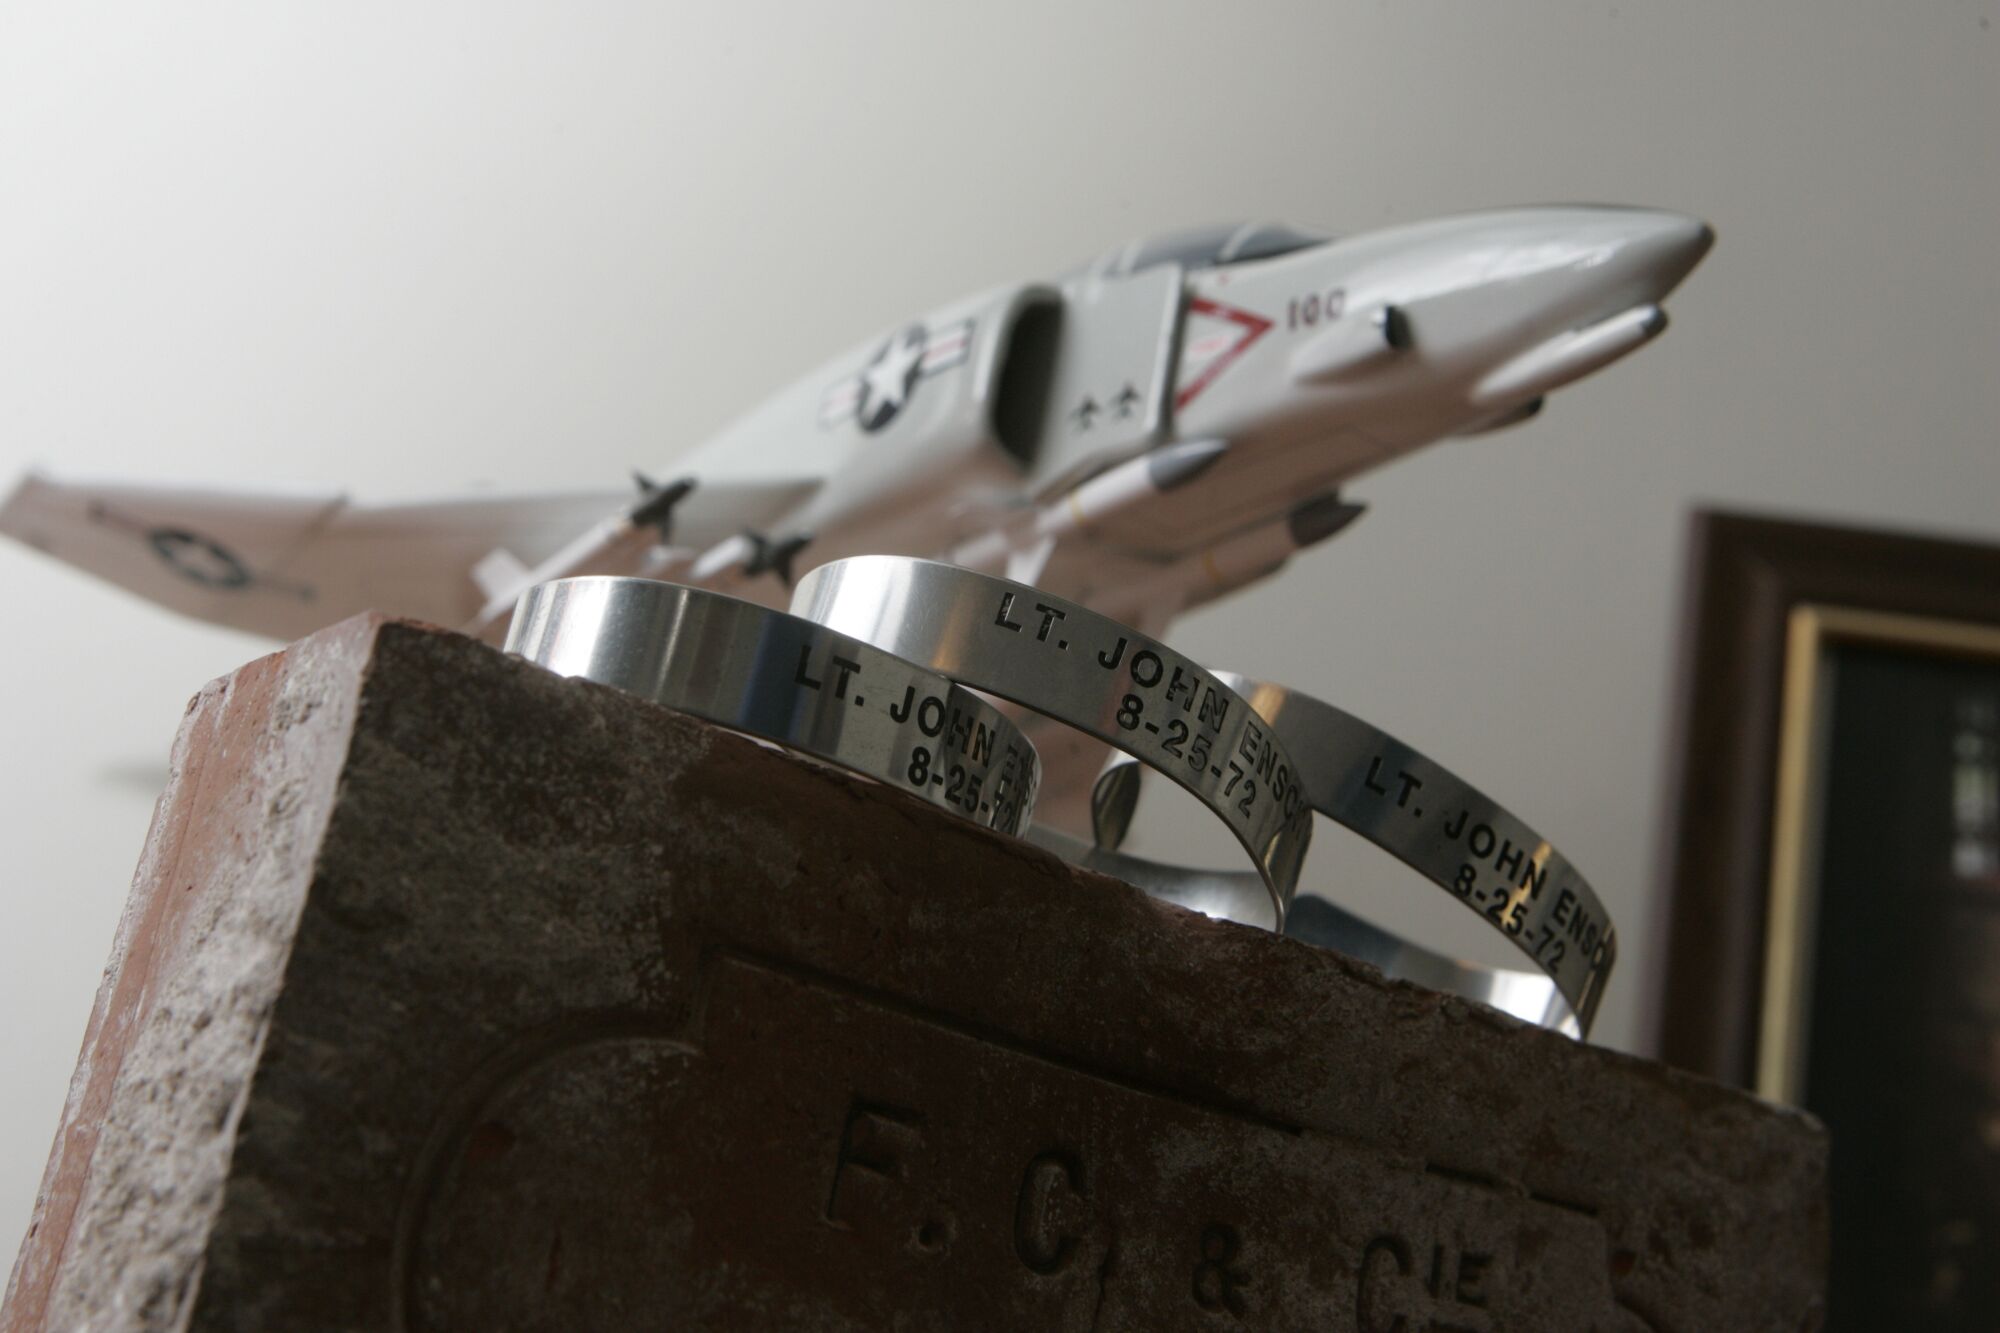 Two metal POW bracelets with Jack Ensch's name engraved on them